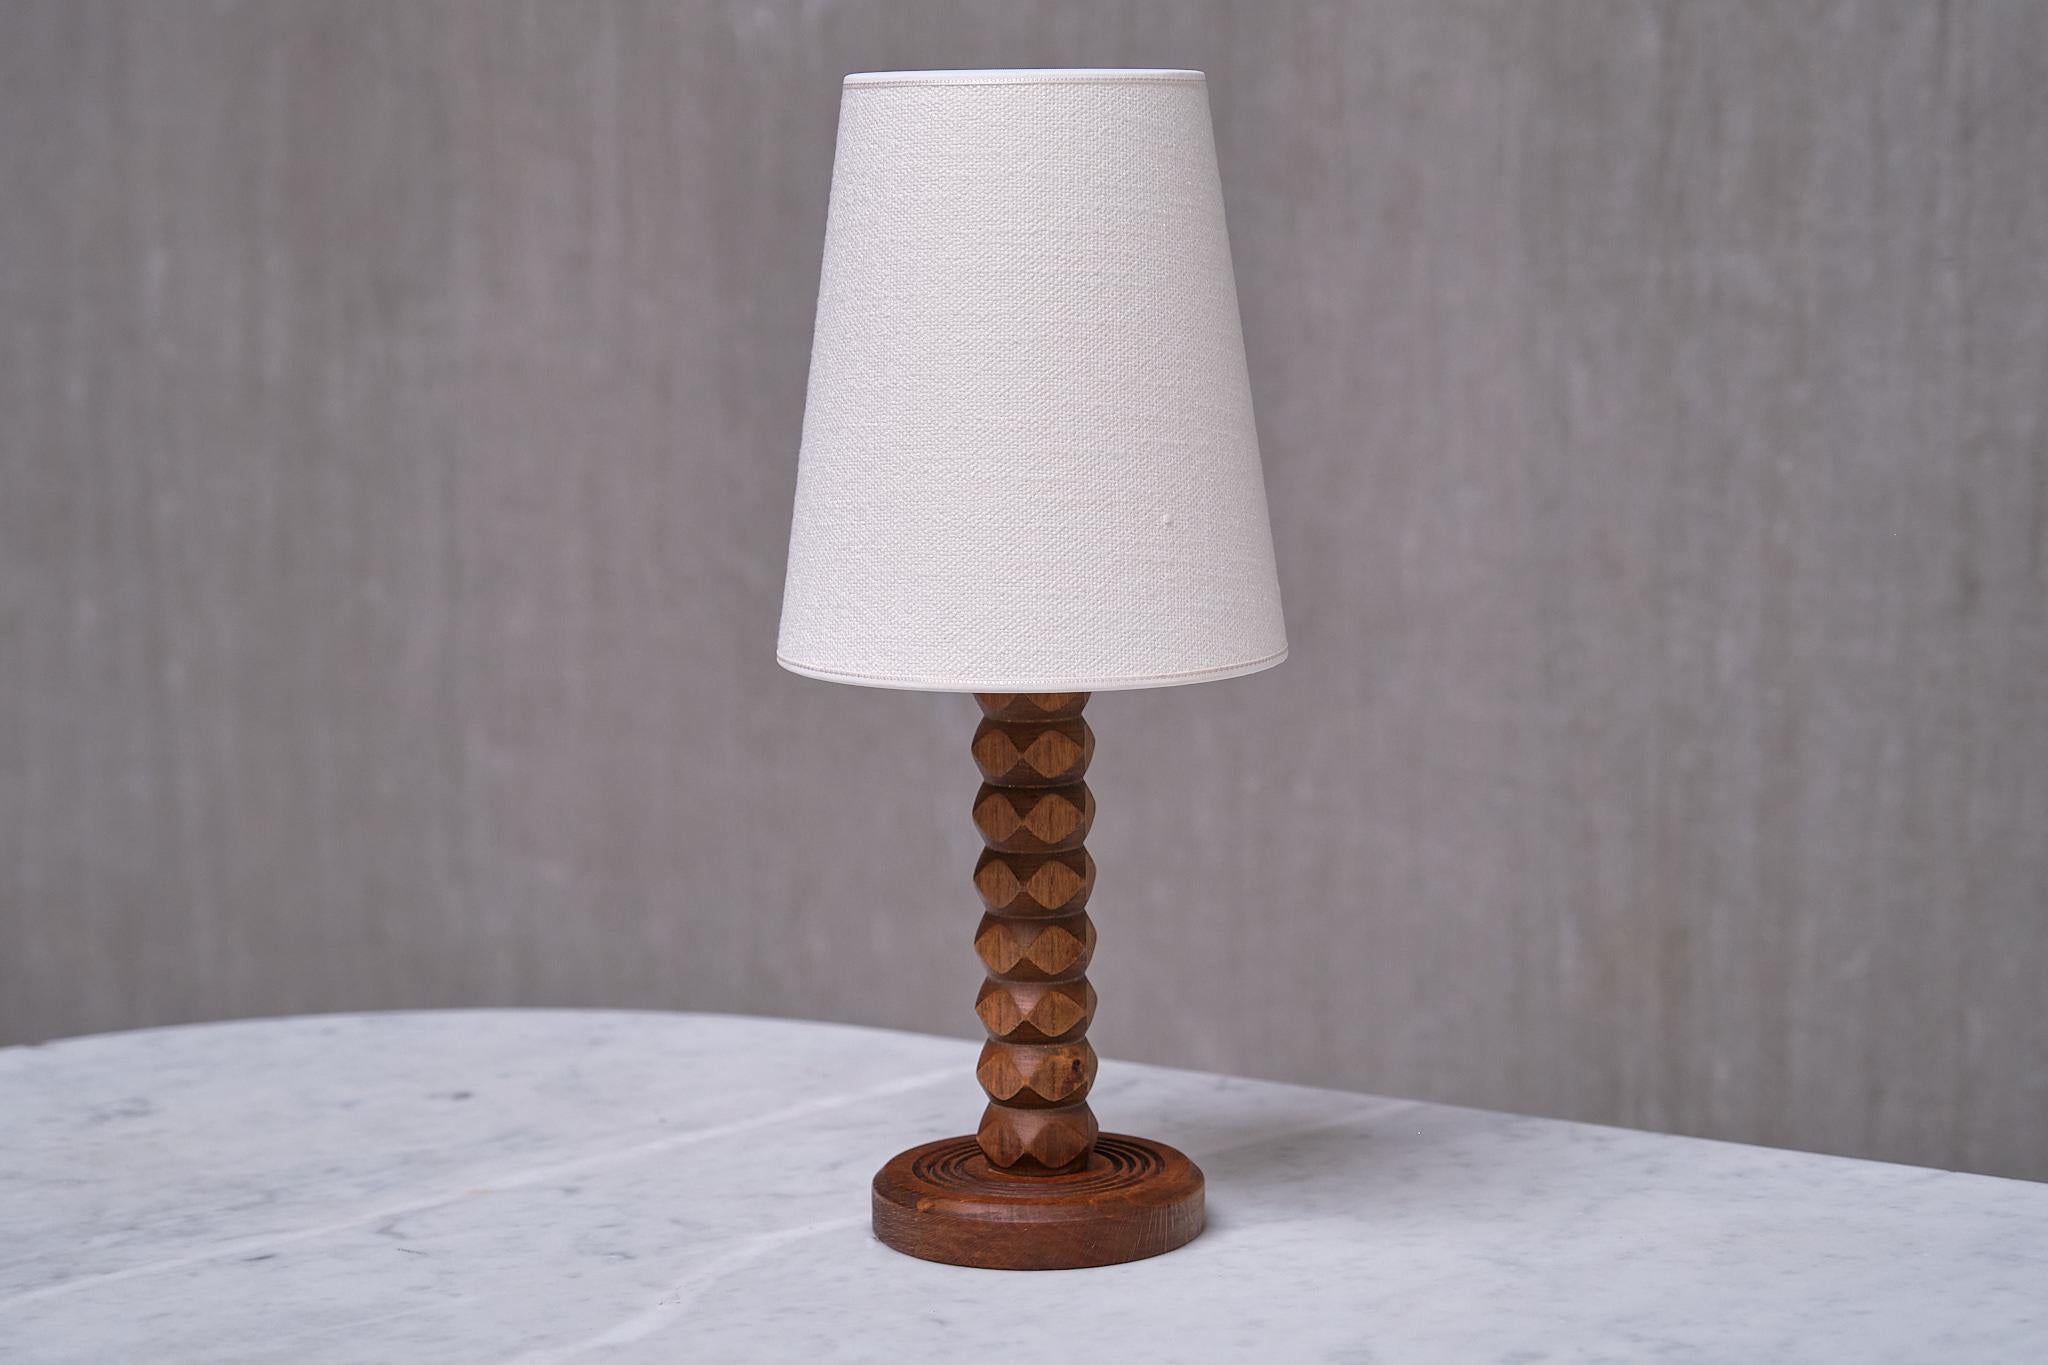 This rare table lamp was produced in France in the 1950s. The rustic and elegant design is attributed to Charles Dudouyt. The different carved shapes of the wood illustrate the craftsmanship and originality of Dudouyt's production.

The lamp is made